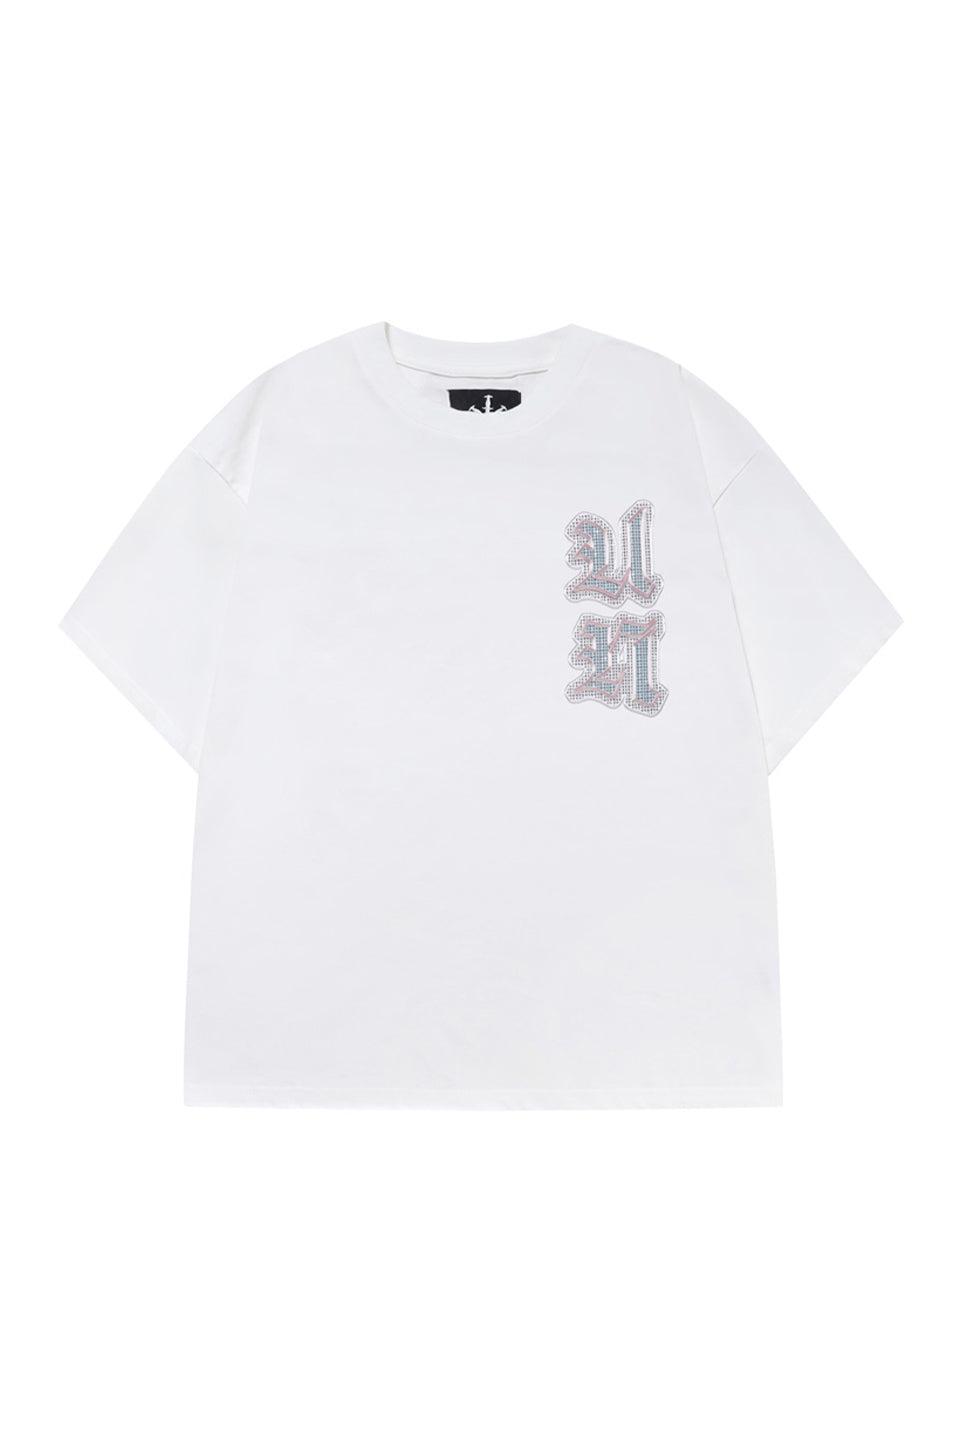 Multi Logo Iced Out Tee - white / M